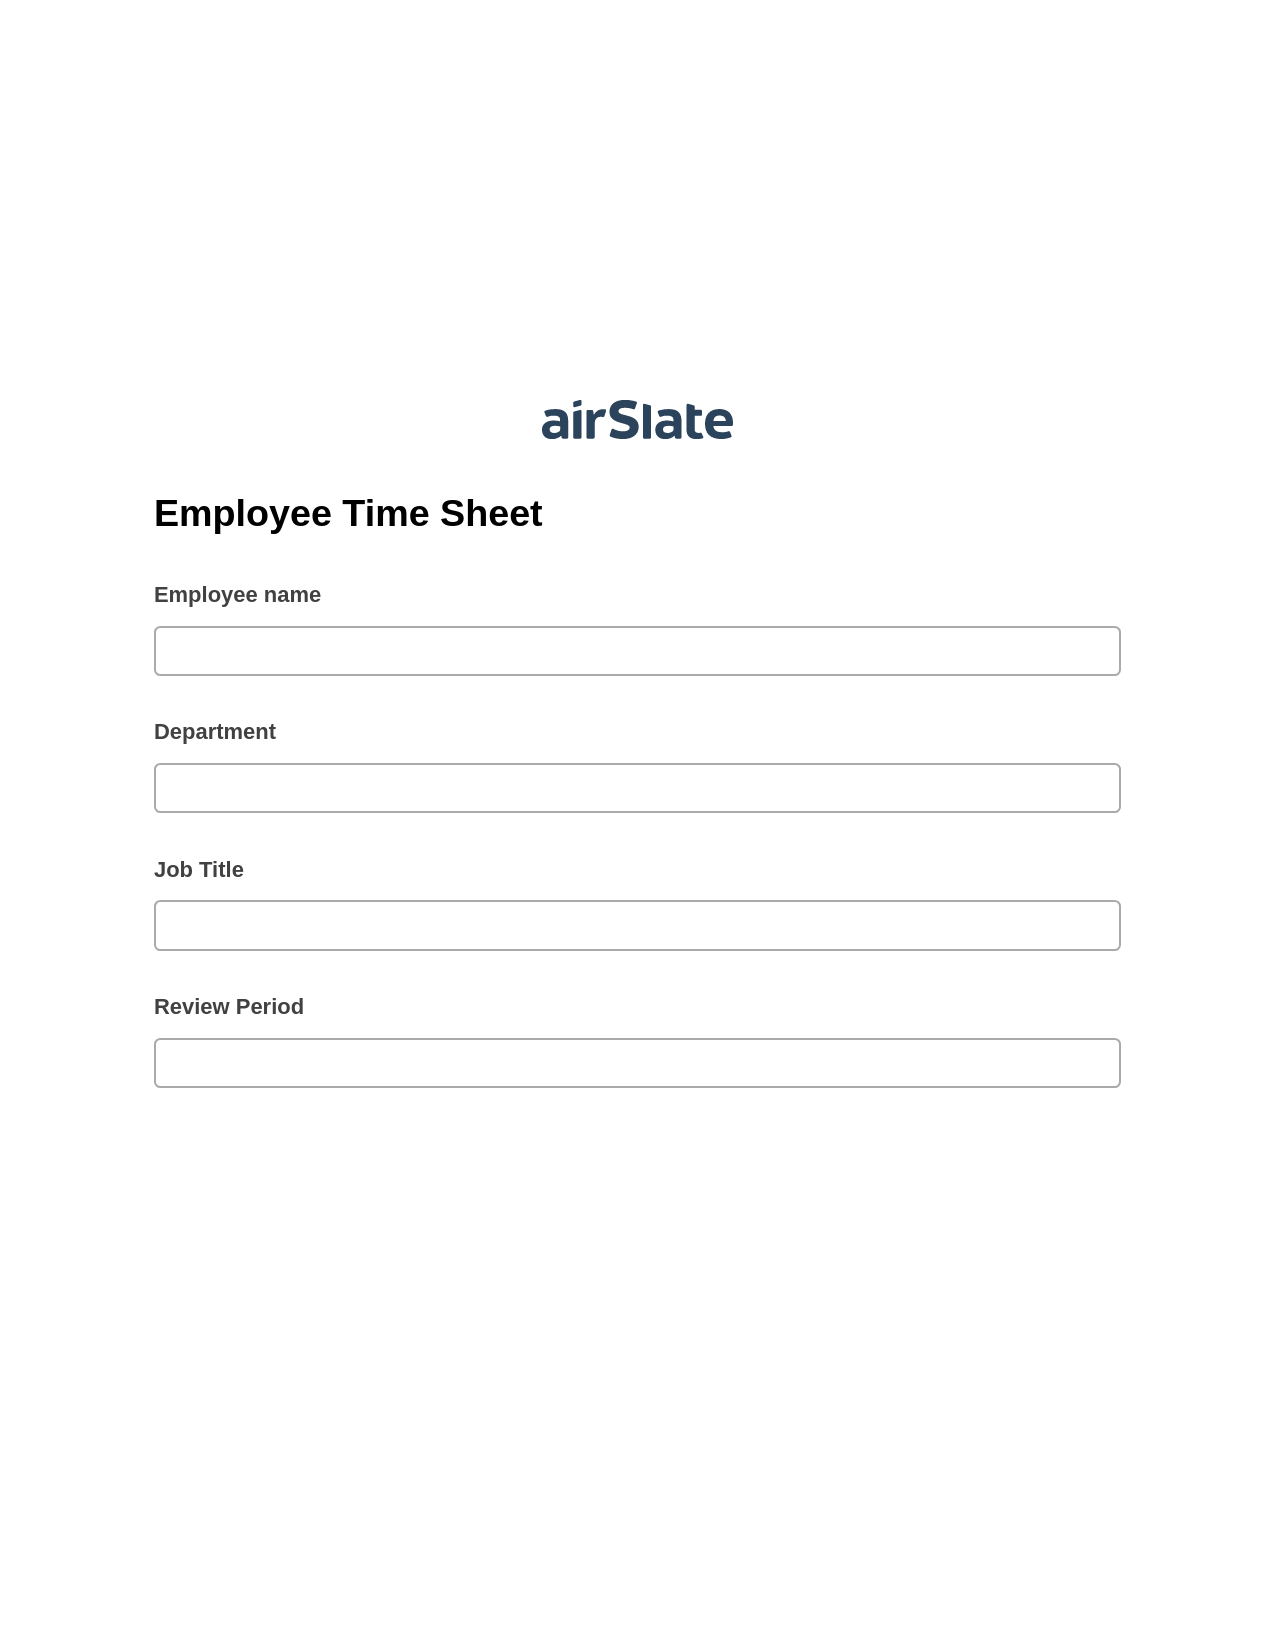 Employee Time Sheet Pre-fill Document Bot, Lock the Slate Bot, Archive to Dropbox Bot